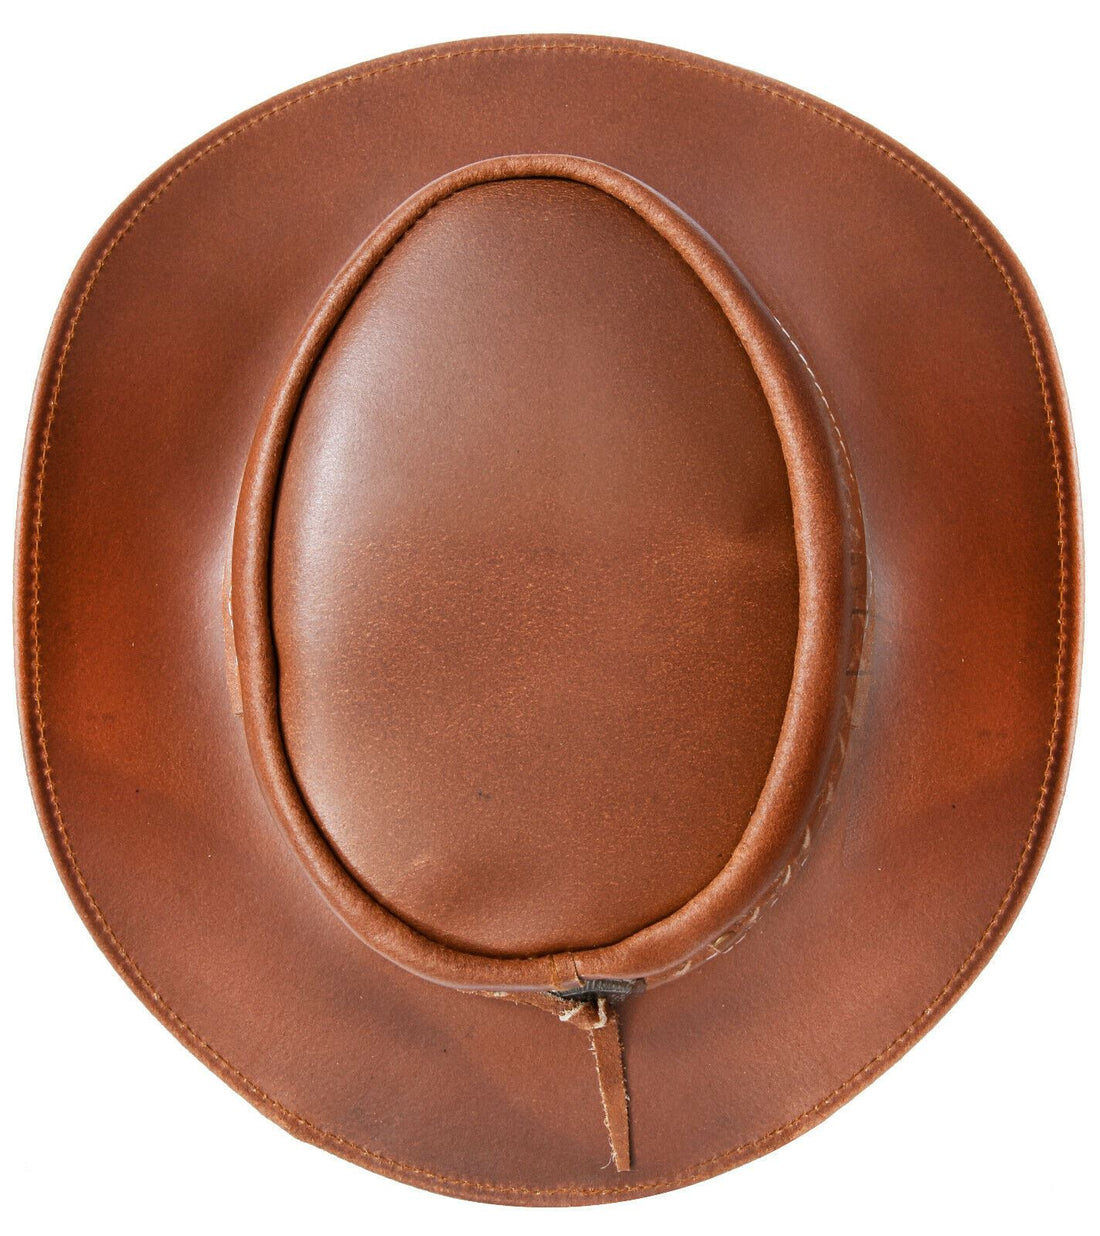 Australian Tan Western Style Cowboy Outback Real Leather Aussie Bush Hat - Upperclass Fashions 